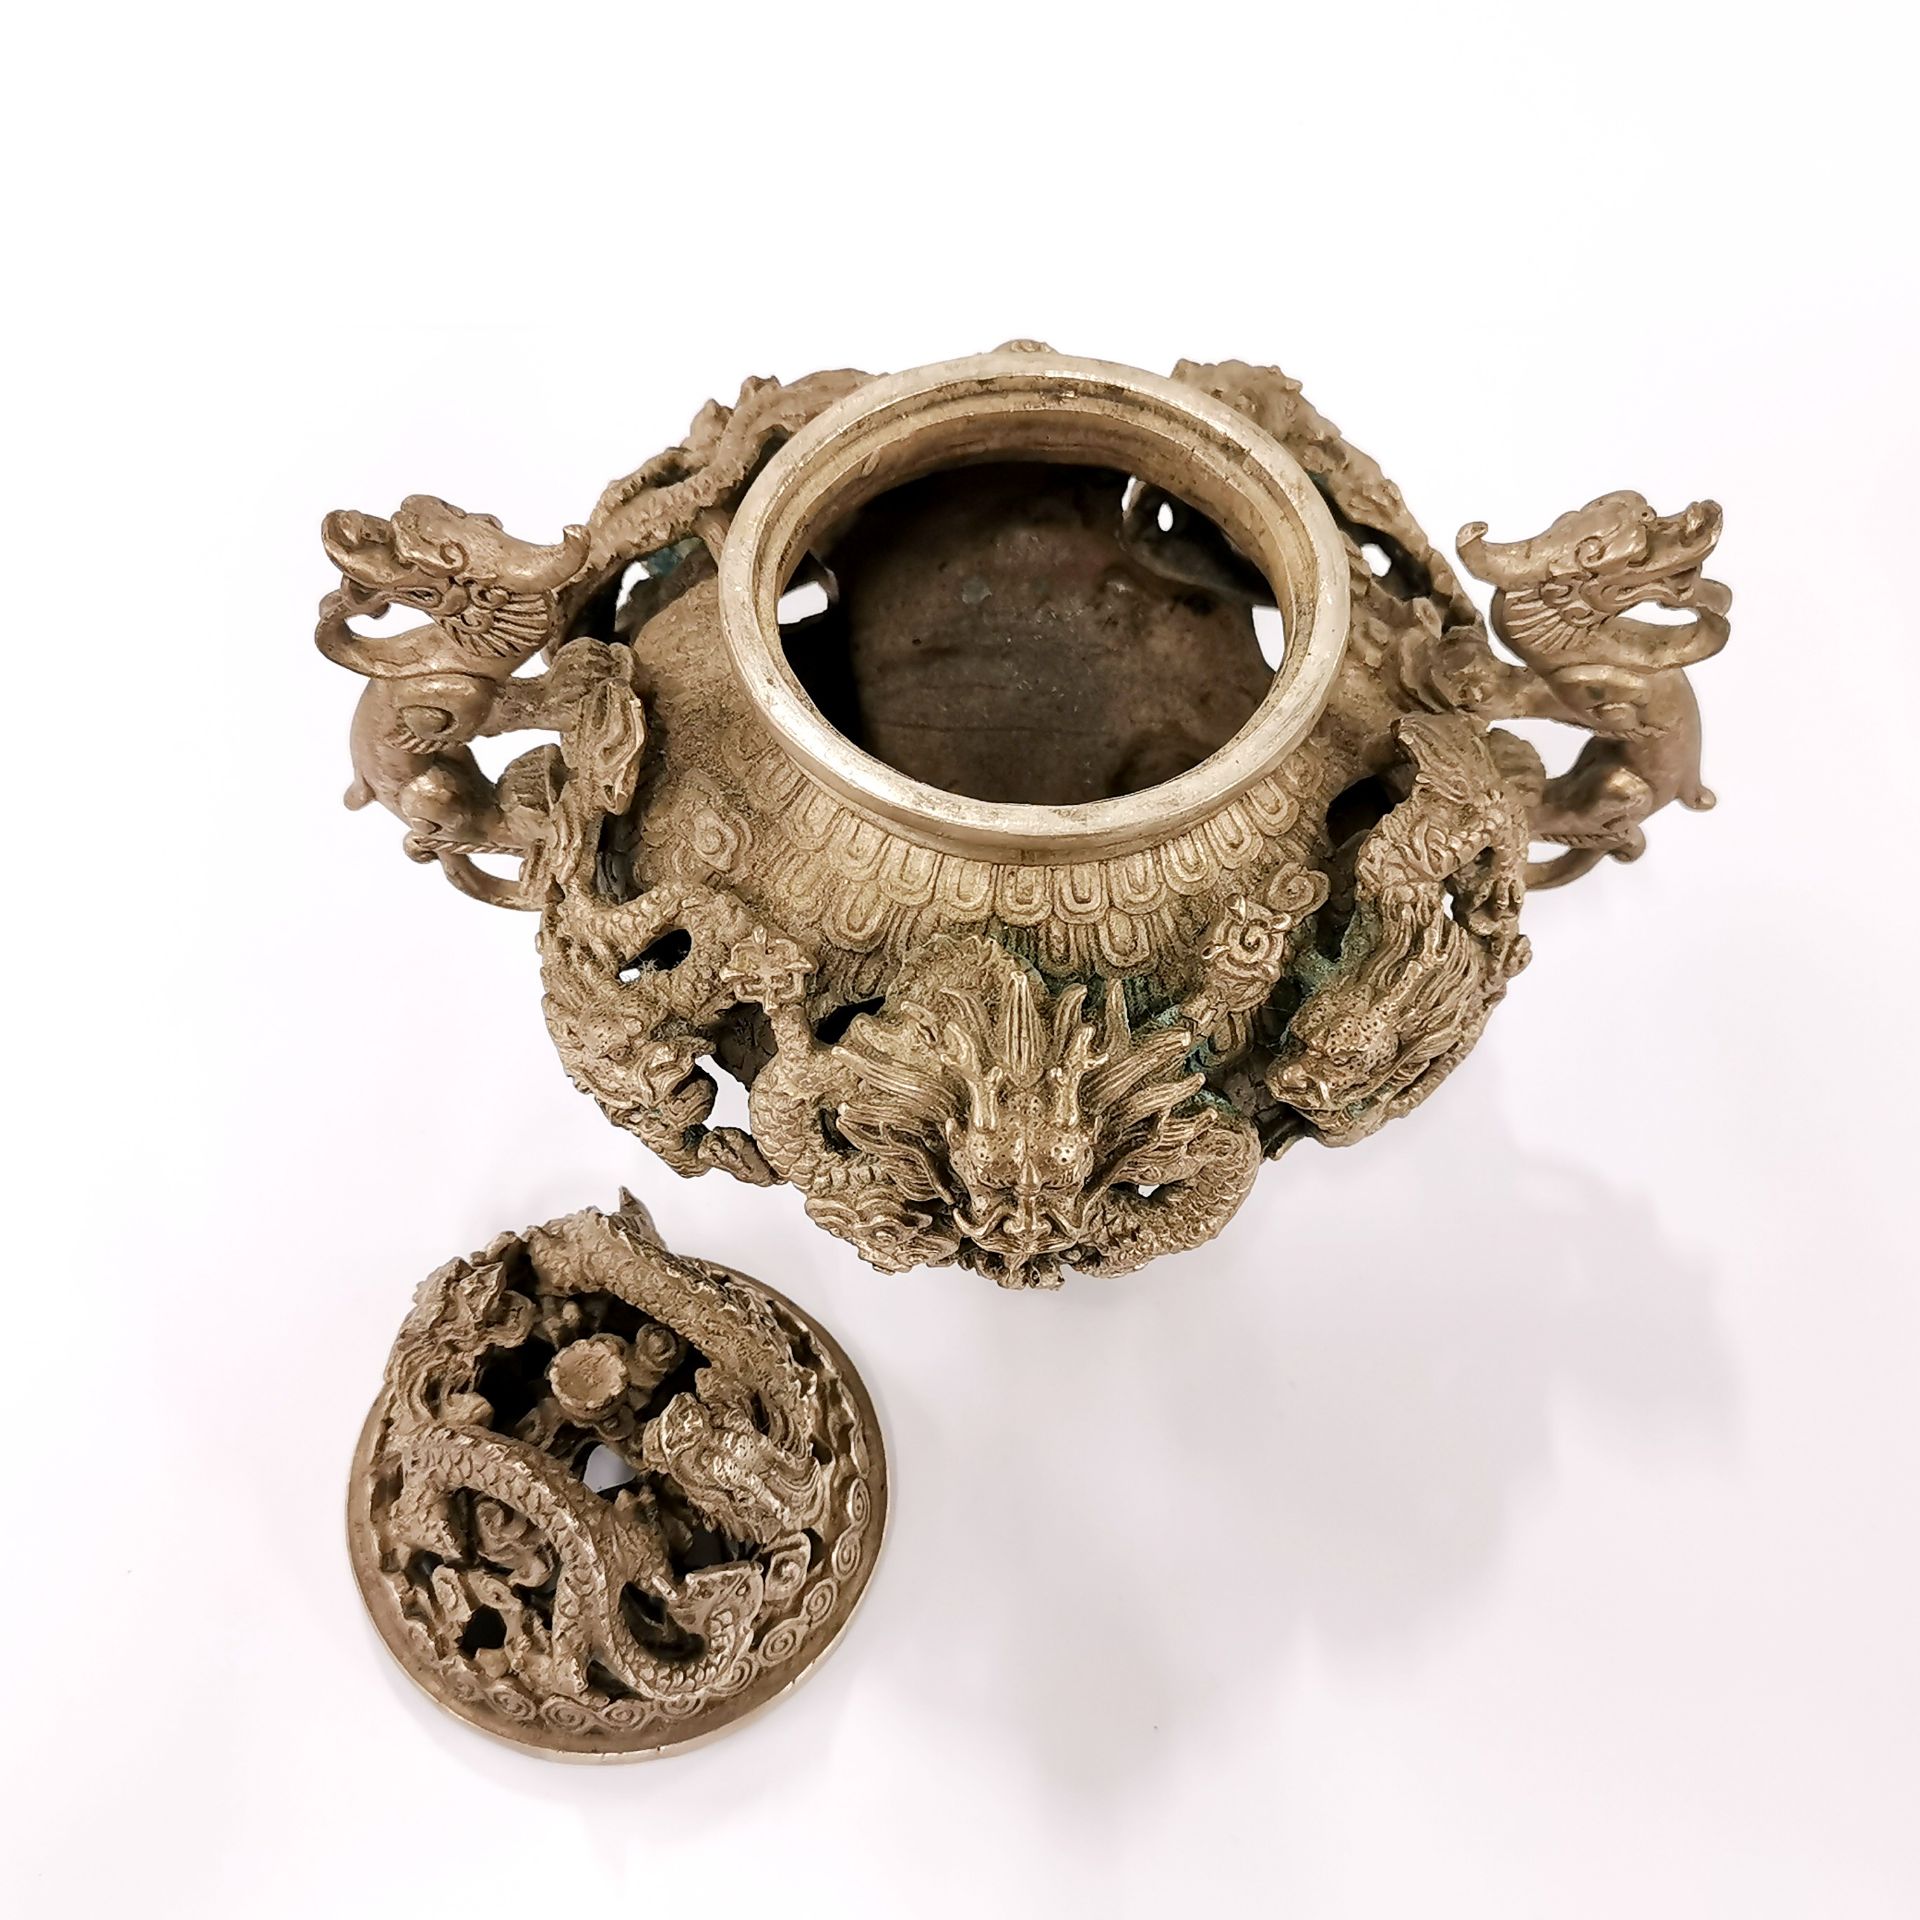 An ornate Chinese silvered metal dragon censer, H. 16CM. - Image 2 of 3